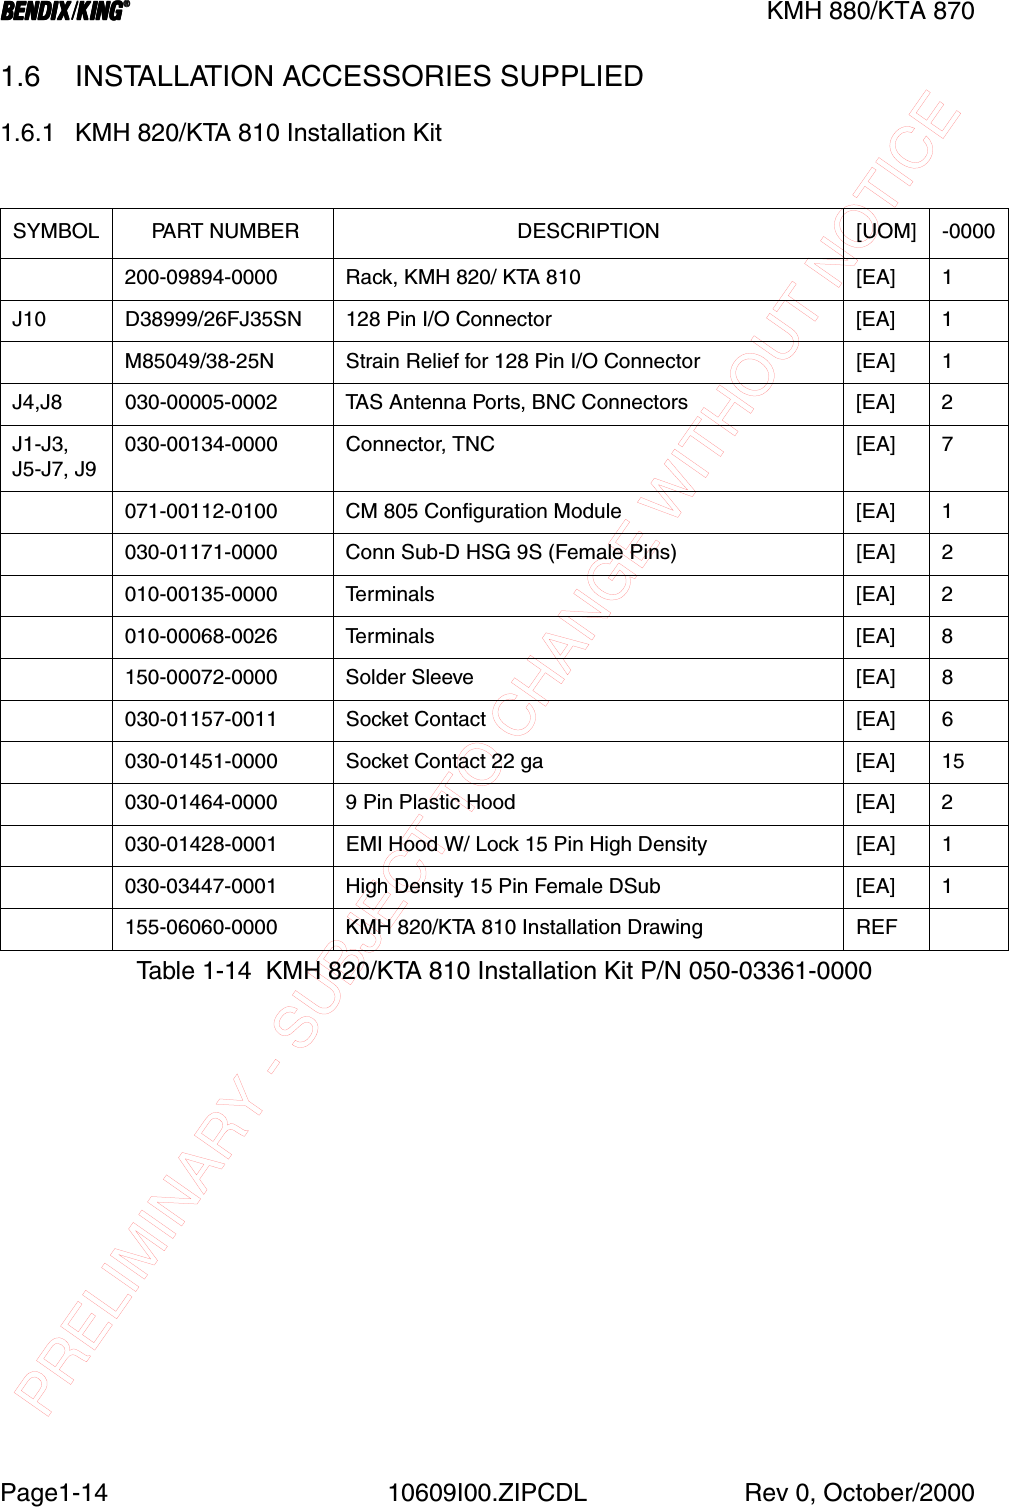 PRELIMINARY - SUBJECT TO CHANGE WITHOUT NOTICEBBBBKMH 880/KTA 870Page1-14 10609I00.ZIPCDL Rev 0, October/20001.6 INSTALLATION ACCESSORIES SUPPLIED1.6.1 KMH 820/KTA 810 Installation Kit  SYMBOL  PART NUMBER DESCRIPTION [UOM] -0000200-09894-0000 Rack, KMH 820/ KTA 810 [EA] 1J10 D38999/26FJ35SN 128 Pin I/O Connector [EA] 1M85049/38-25N Strain Relief for 128 Pin I/O Connector [EA] 1J4,J8  030-00005-0002 TAS Antenna Ports, BNC Connectors   [EA] 2J1-J3, J5-J7, J9030-00134-0000 Connector, TNC             [EA] 7071-00112-0100 CM 805 Configuration Module [EA] 1  030-01171-0000 Conn Sub-D HSG 9S (Female Pins) [EA] 2010-00135-0000 Terminals [EA] 2010-00068-0026 Terminals [EA] 8150-00072-0000 Solder Sleeve [EA] 8030-01157-0011 Socket Contact [EA] 6030-01451-0000 Socket Contact 22 ga [EA] 15030-01464-0000 9 Pin Plastic Hood [EA] 2030-01428-0001 EMI Hood W/ Lock 15 Pin High Density [EA] 1030-03447-0001 High Density 15 Pin Female DSub [EA] 1155-06060-0000 KMH 820/KTA 810 Installation Drawing REFTable 1-14  KMH 820/KTA 810 Installation Kit P/N 050-03361-0000